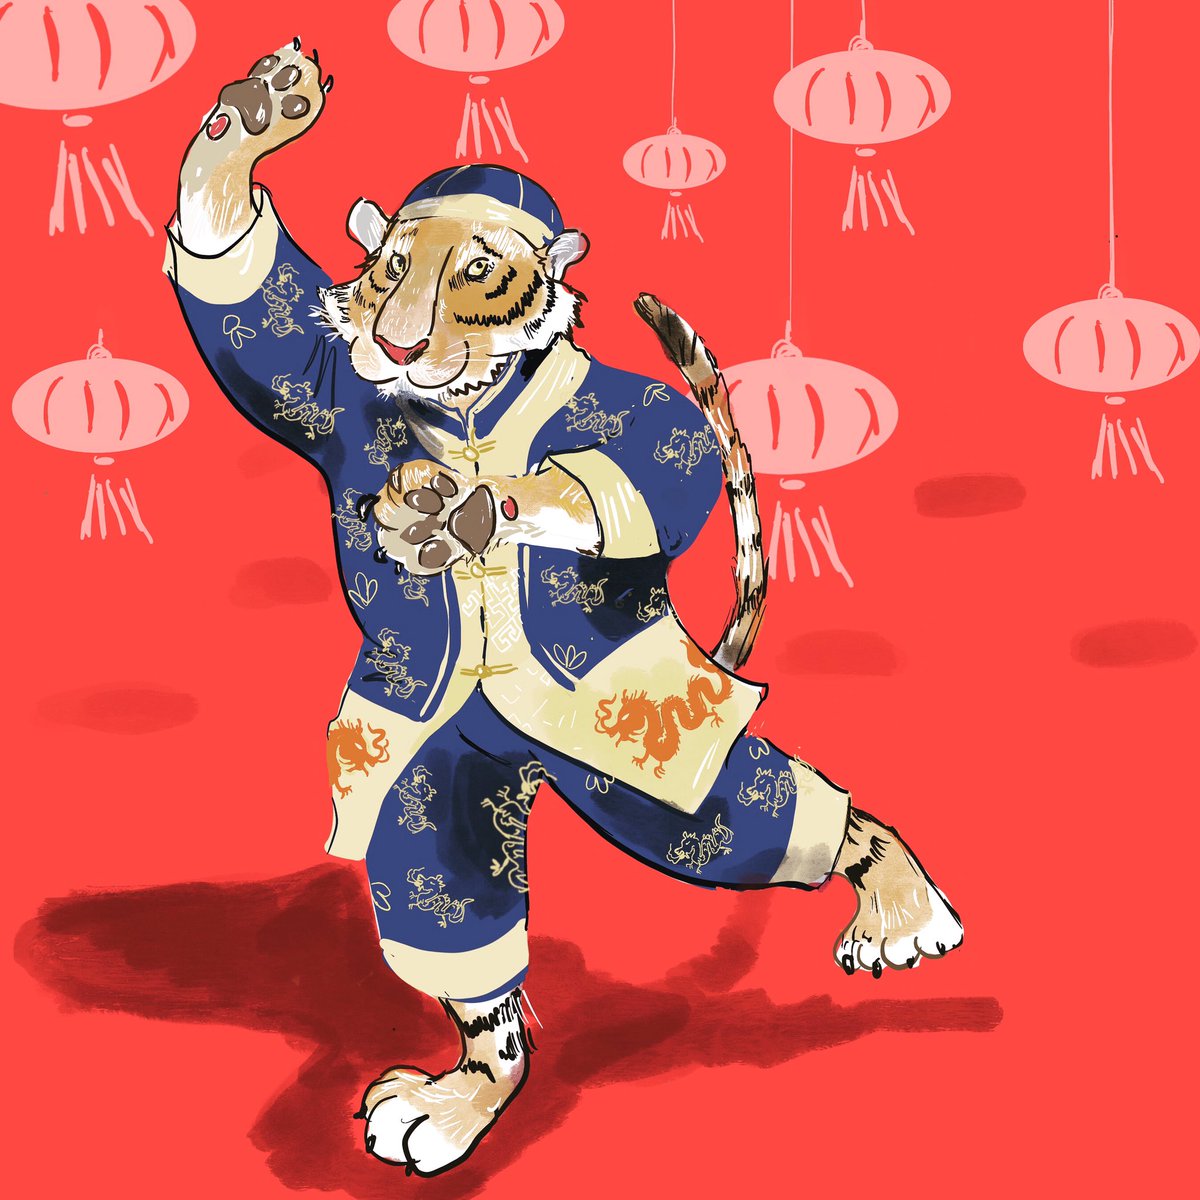 Happy Lunar New Year! Gong Hei Fat Choy! (I hope I got that right and fully expect my celebrating relatives and friends to correct me if I did not!) #gongheifatchoi, #LunarNewYear, #LunarNewYear2022, #YearOfTheTiger, #Tiger, #Chinesedancr, #ChineseNewYear, #TigerIllustration